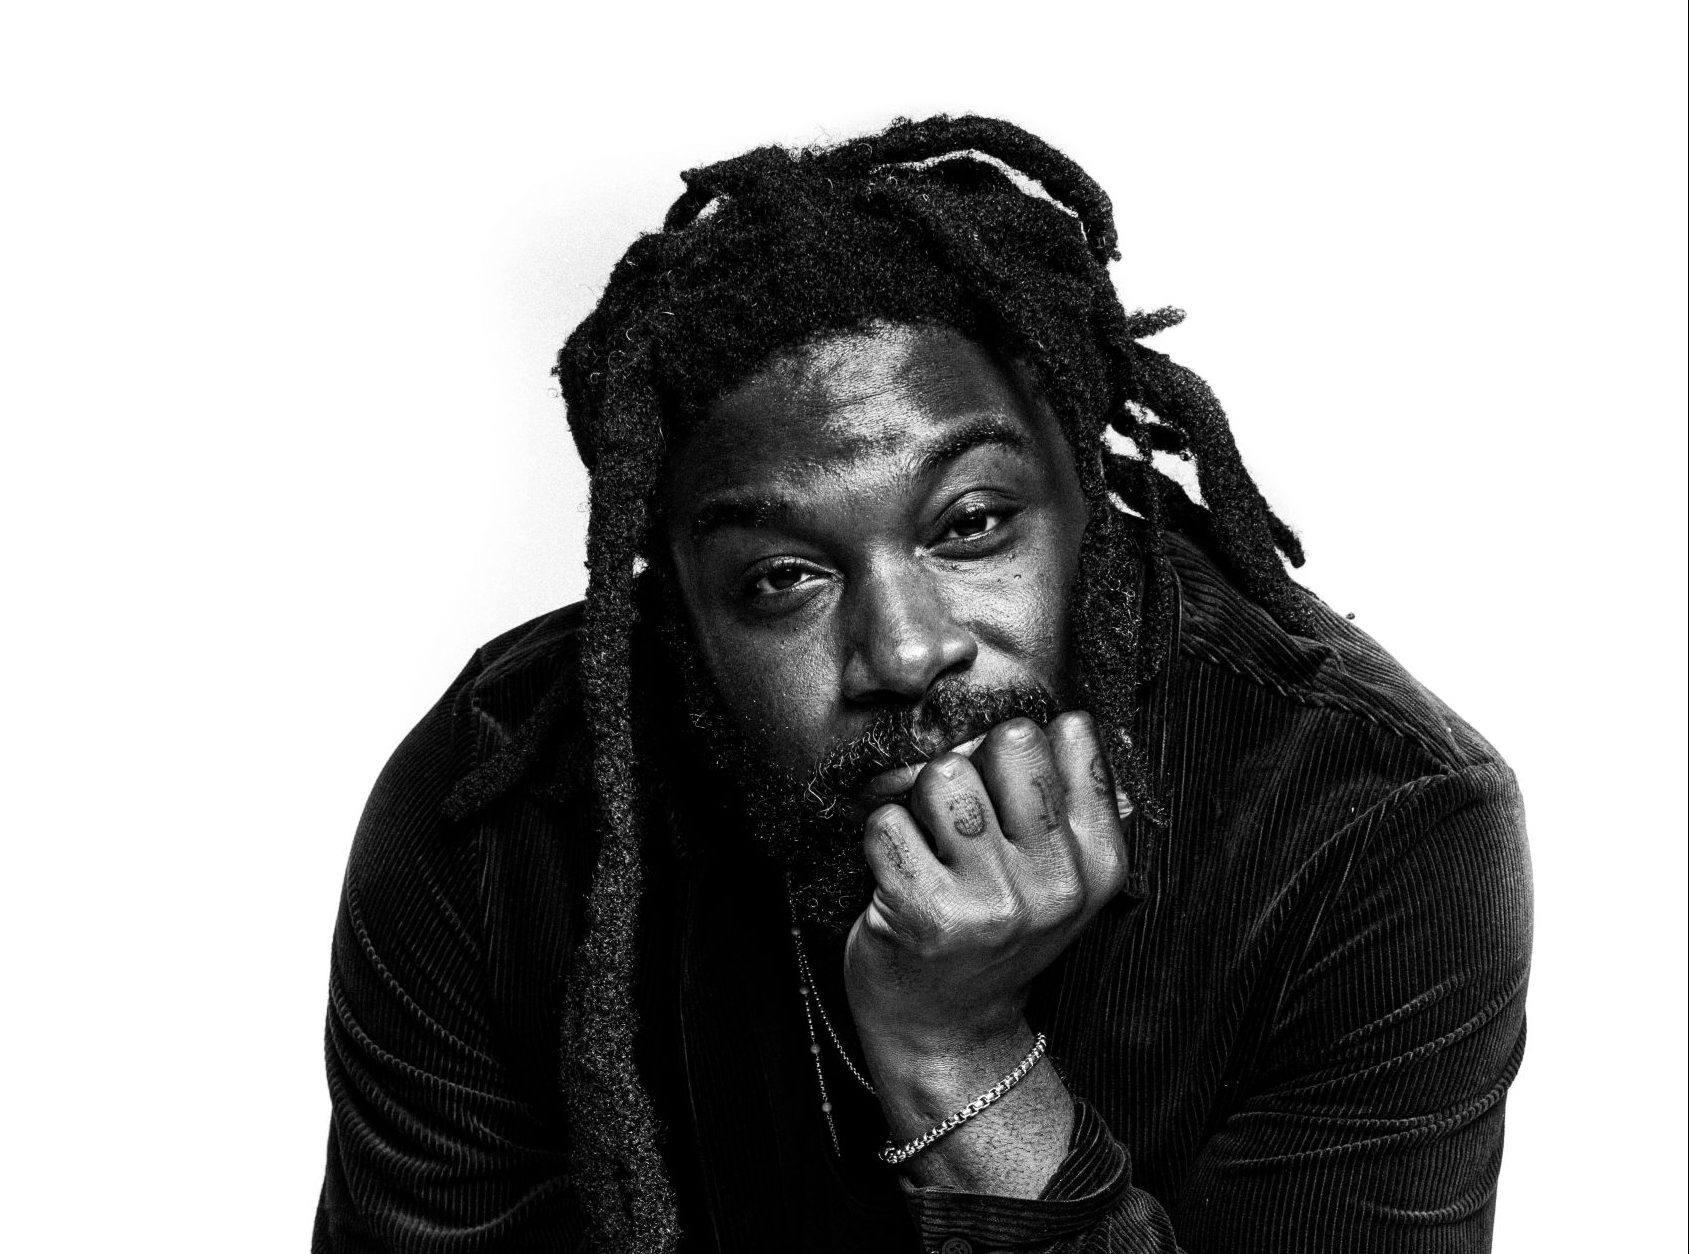 a photo of a Black man with dreadlocks sitting on a chair, with his head leaning on his hand in a thoughtful pose